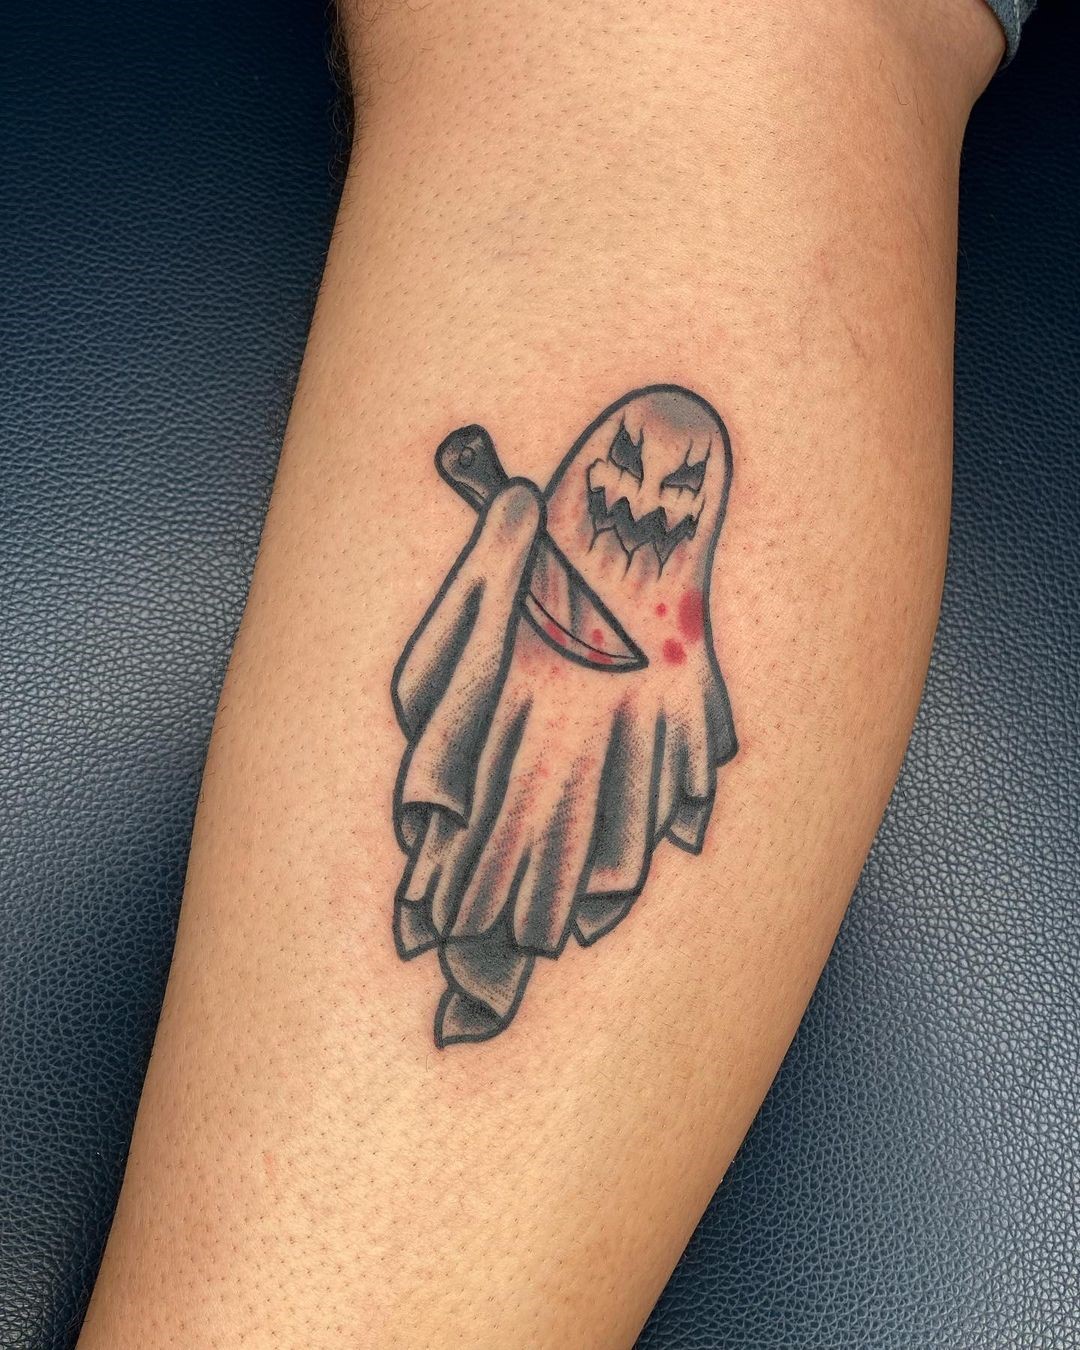 Ghost tattoo ideas for men